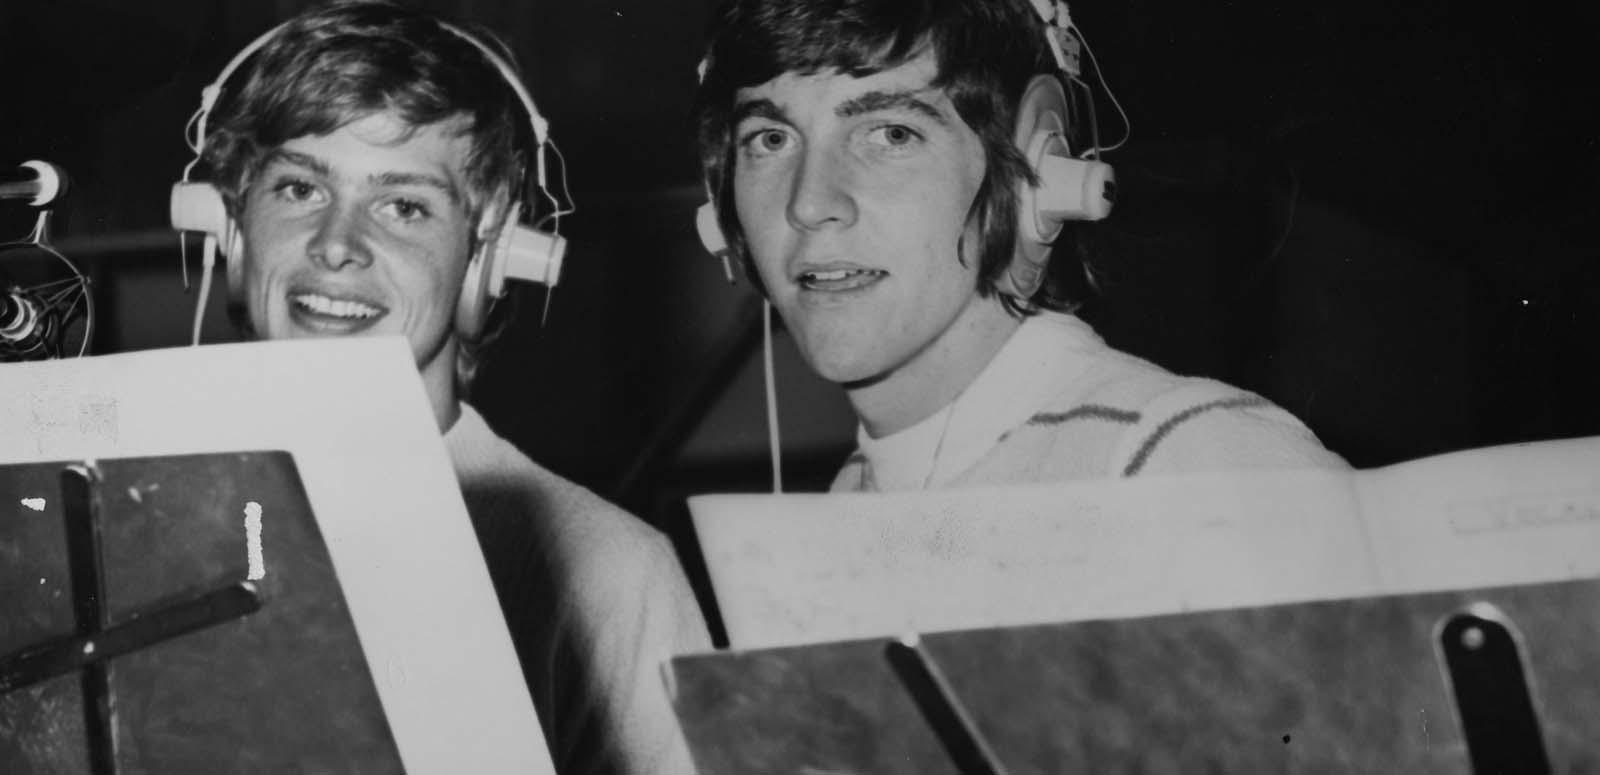 John Farnham and Jeff Phillips wearing headphones and standing behind music stands during a session in the recording studio in 1970